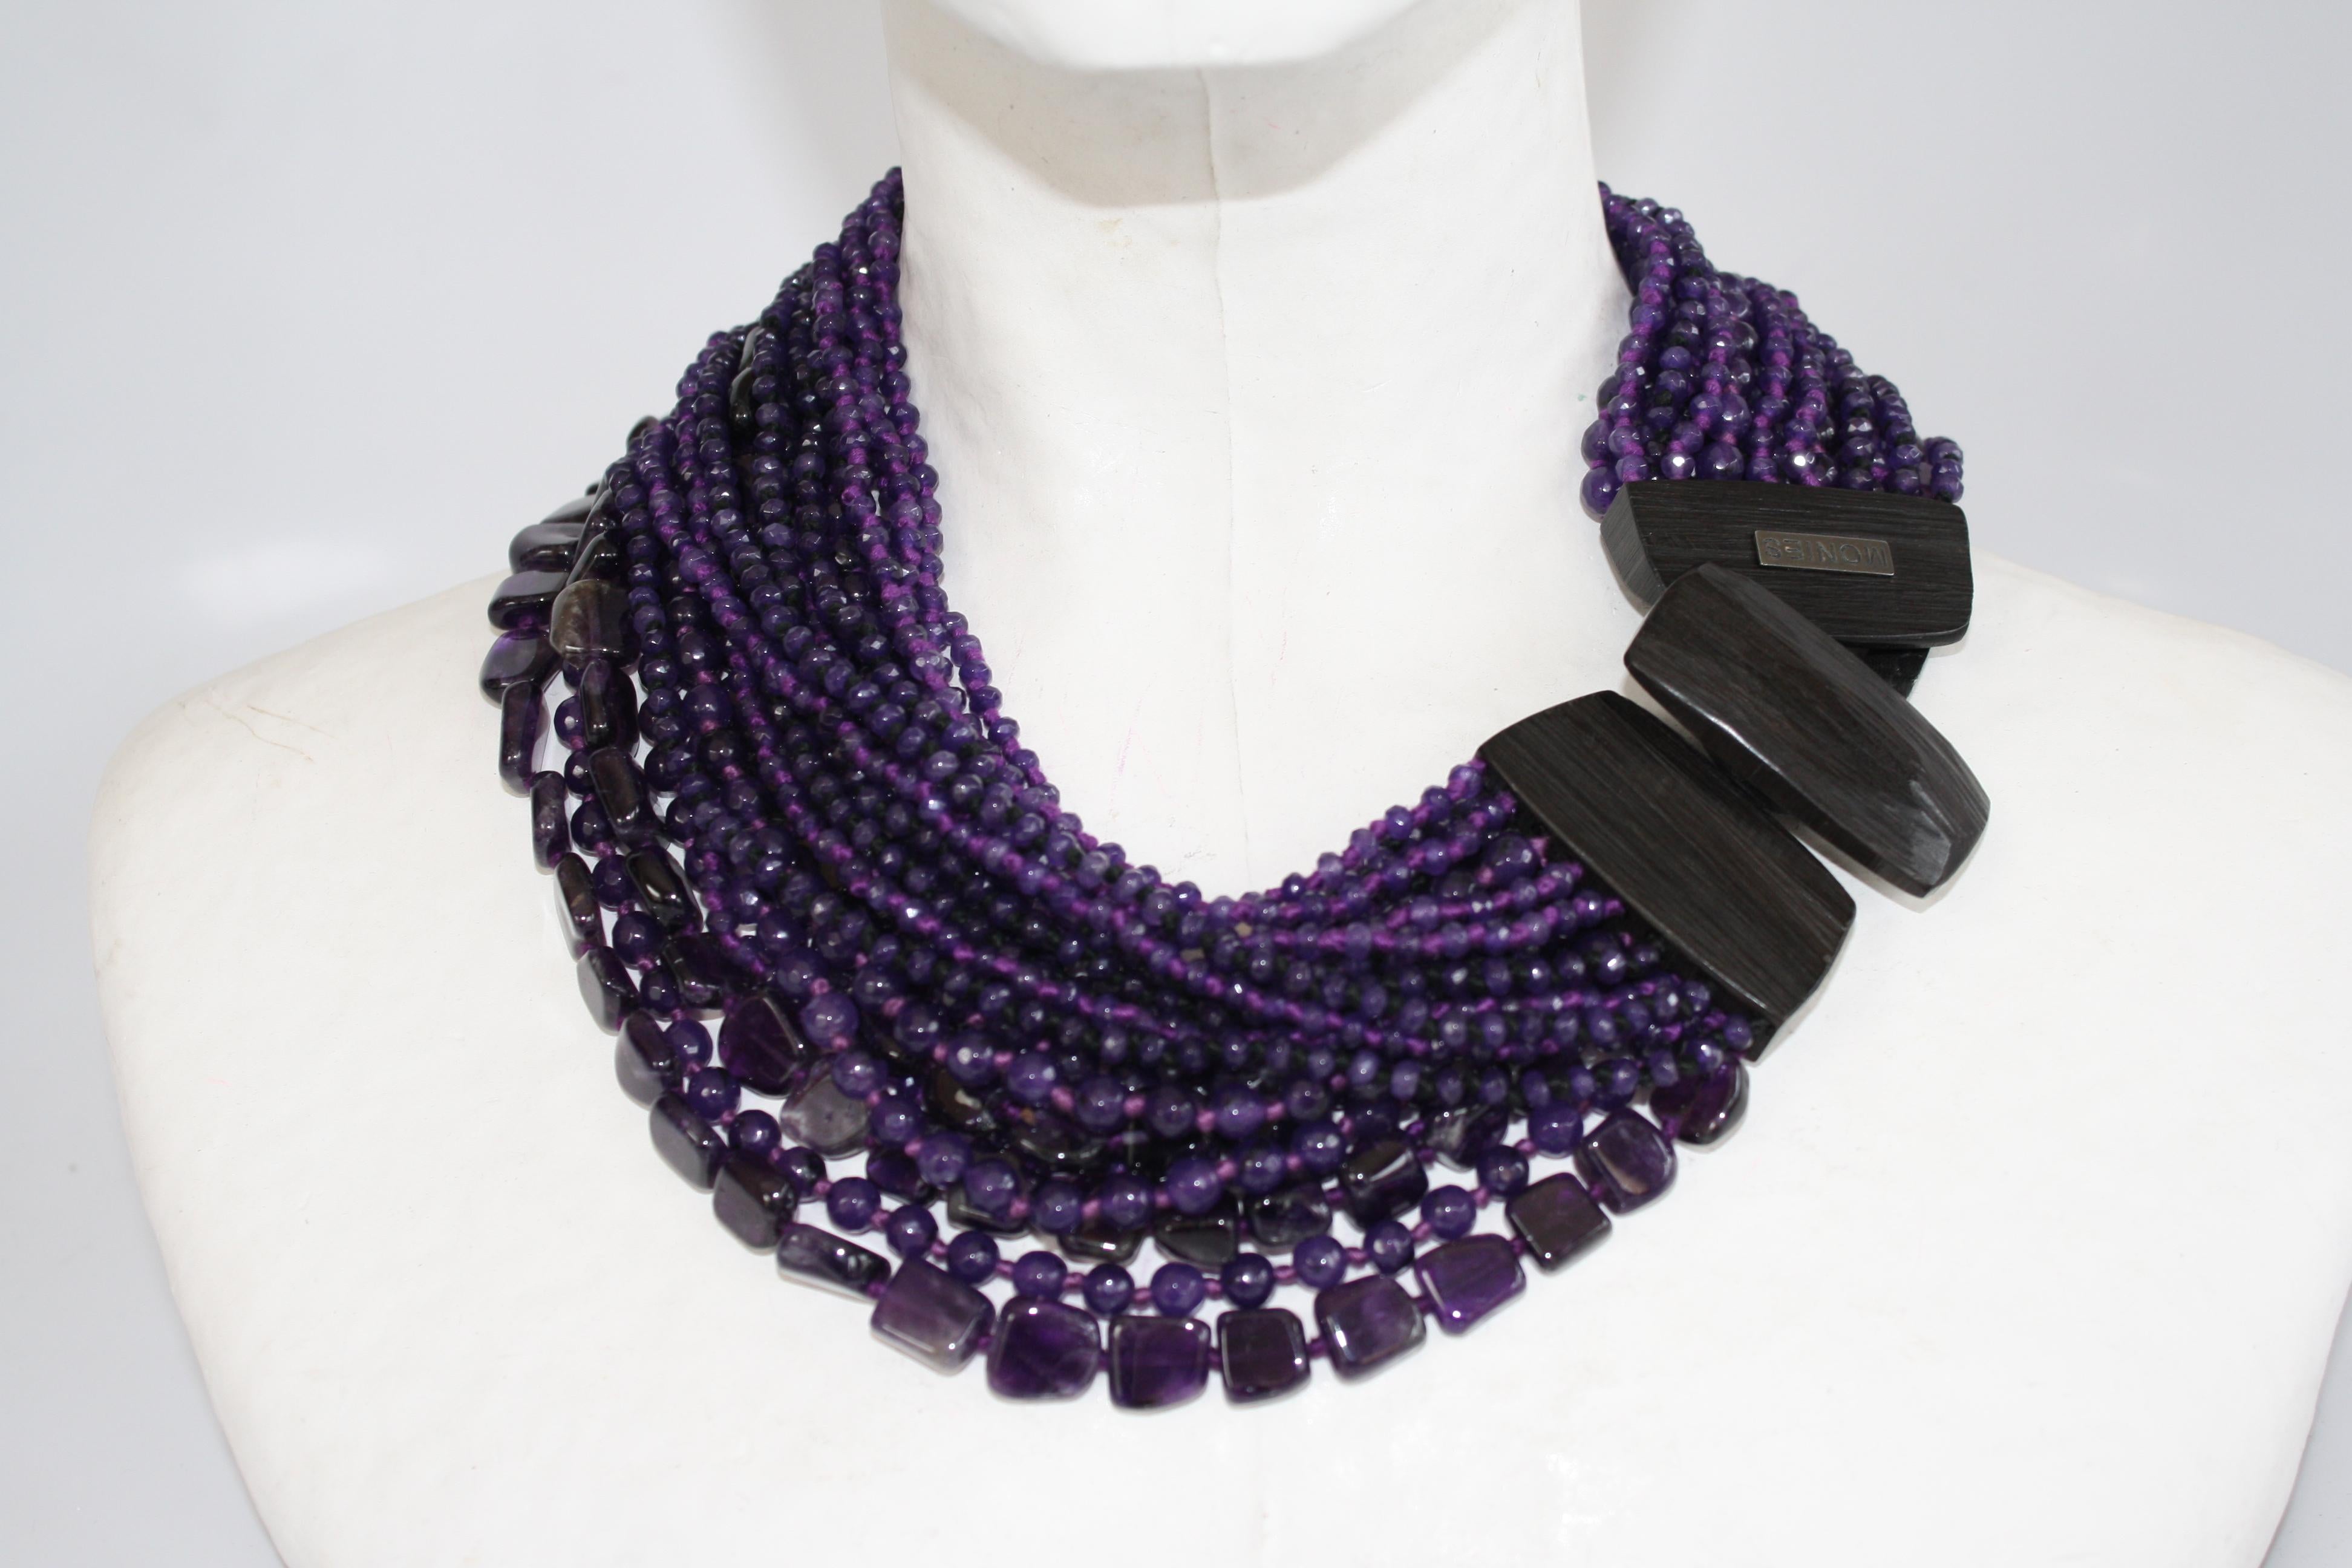 Gorgeous strands of amethyst beads are connected to a fabulous ebony wood and leather closure in this statement necklace from Monies Denmark. 